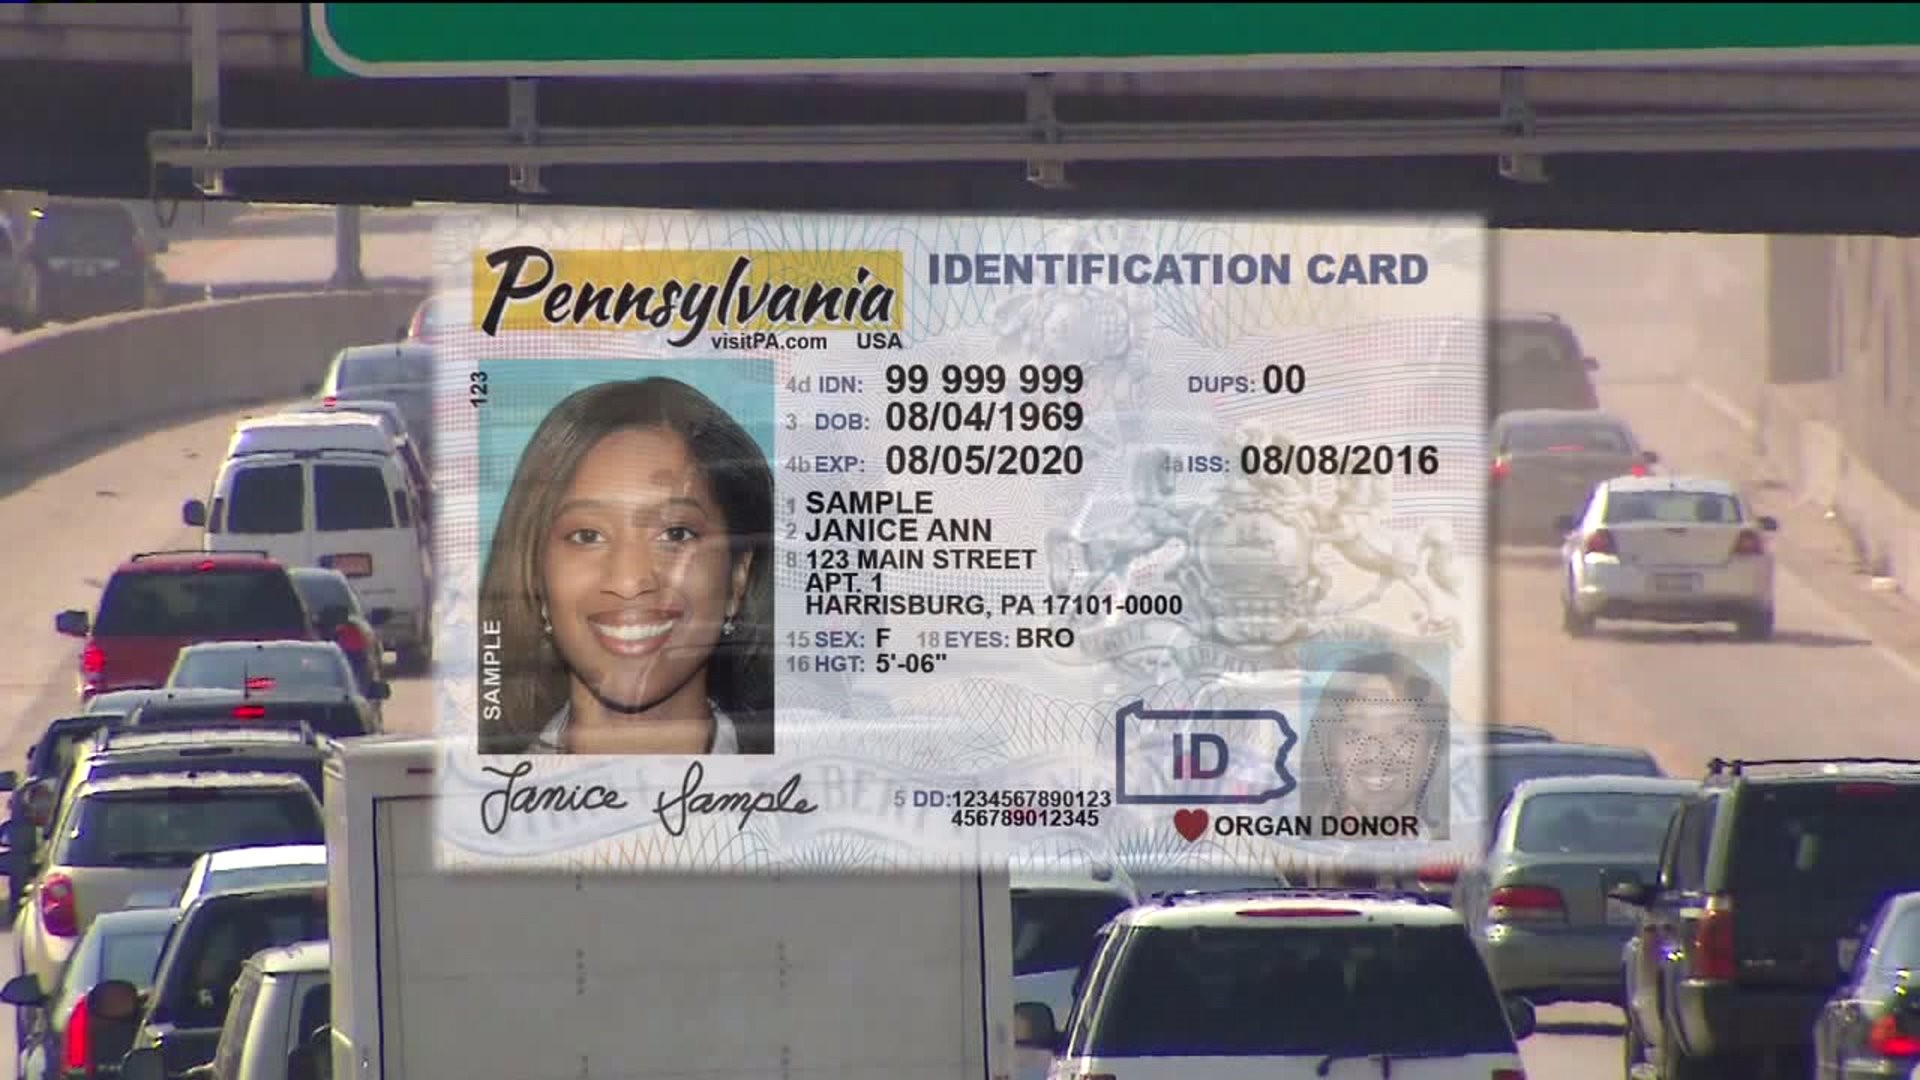 Pop-up Event to Pre-verify for REAL ID Coming to Airport